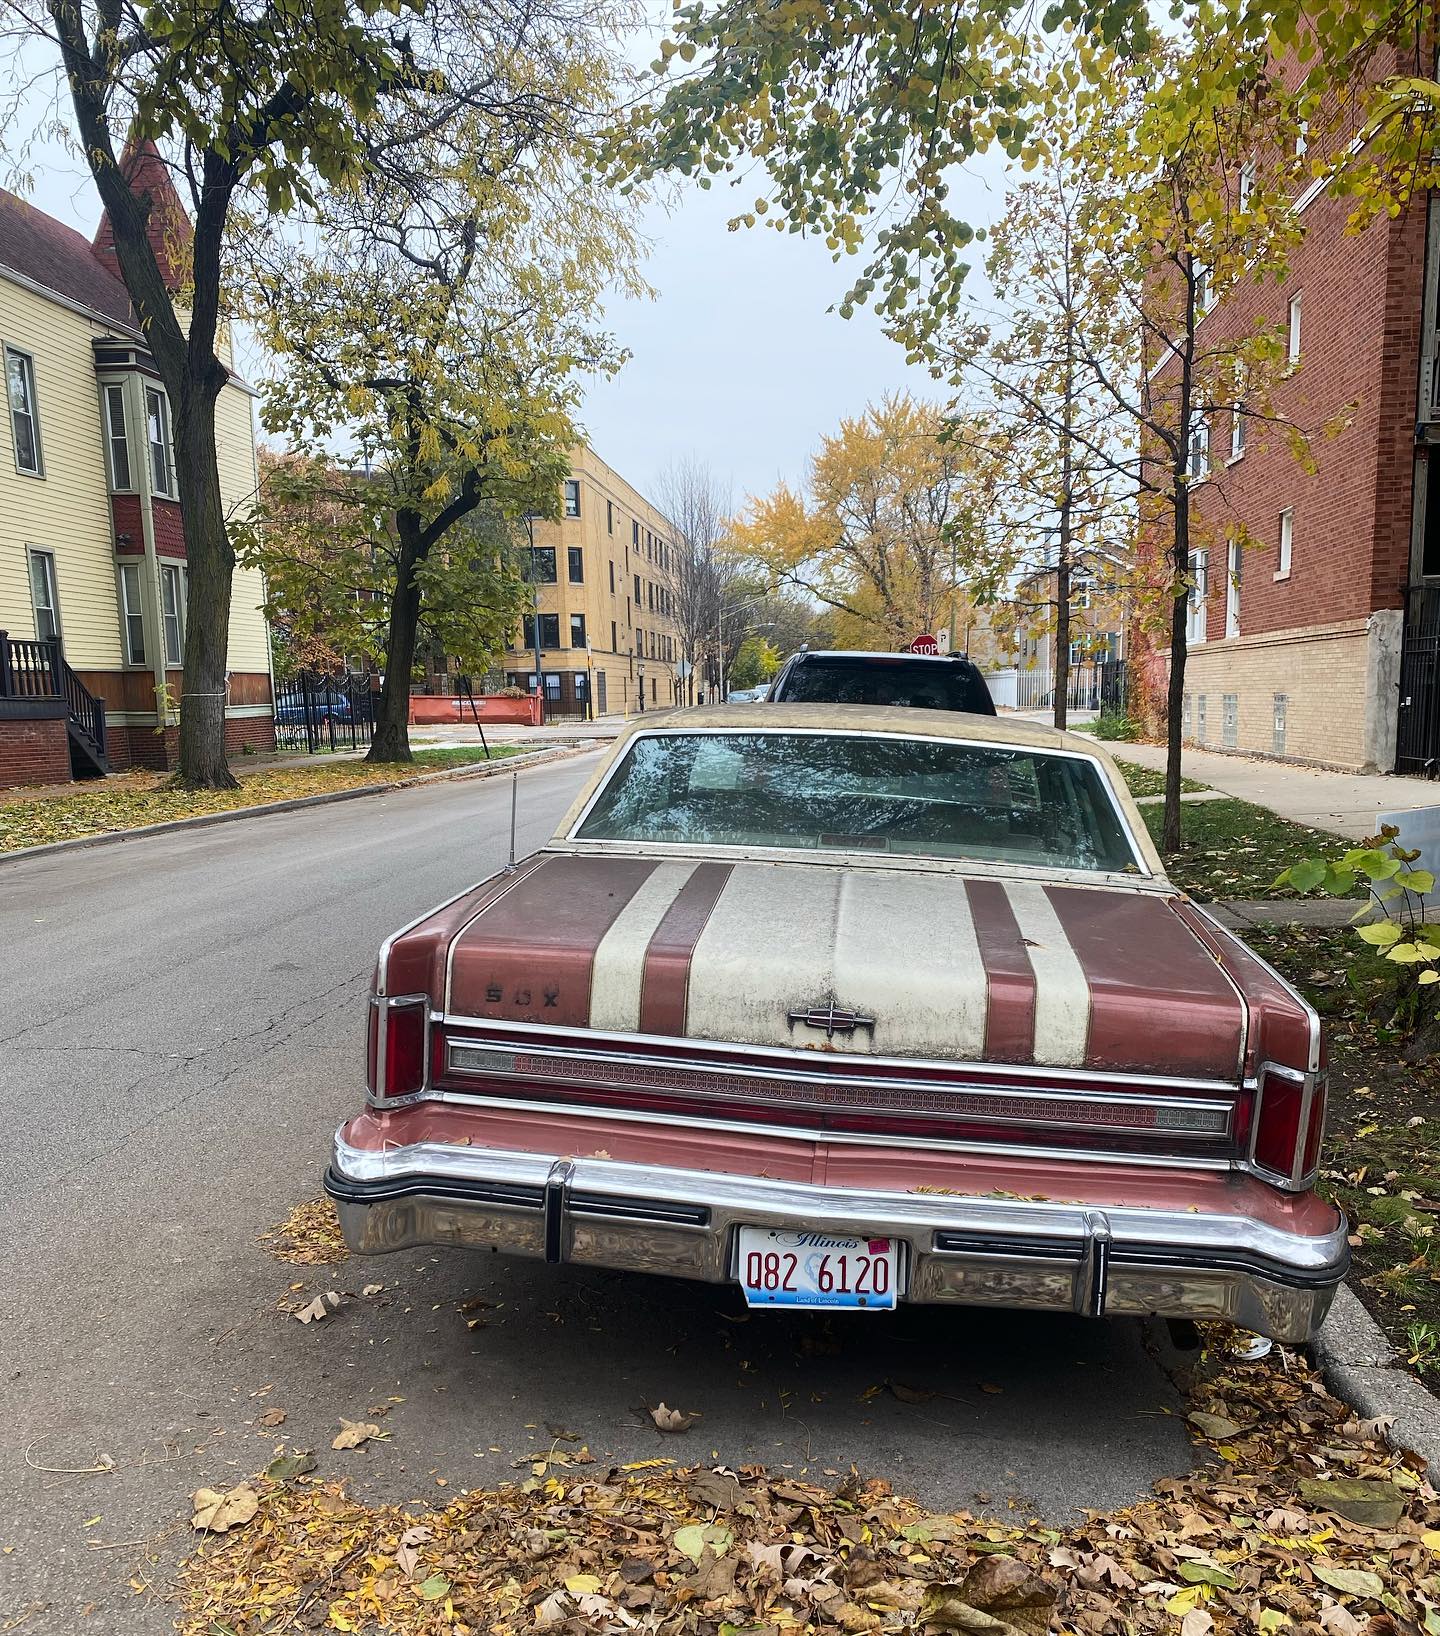 Please note the rusty “Sox” letters on the left side. #thisischicago #logansquare #autumnvibes #chidetours